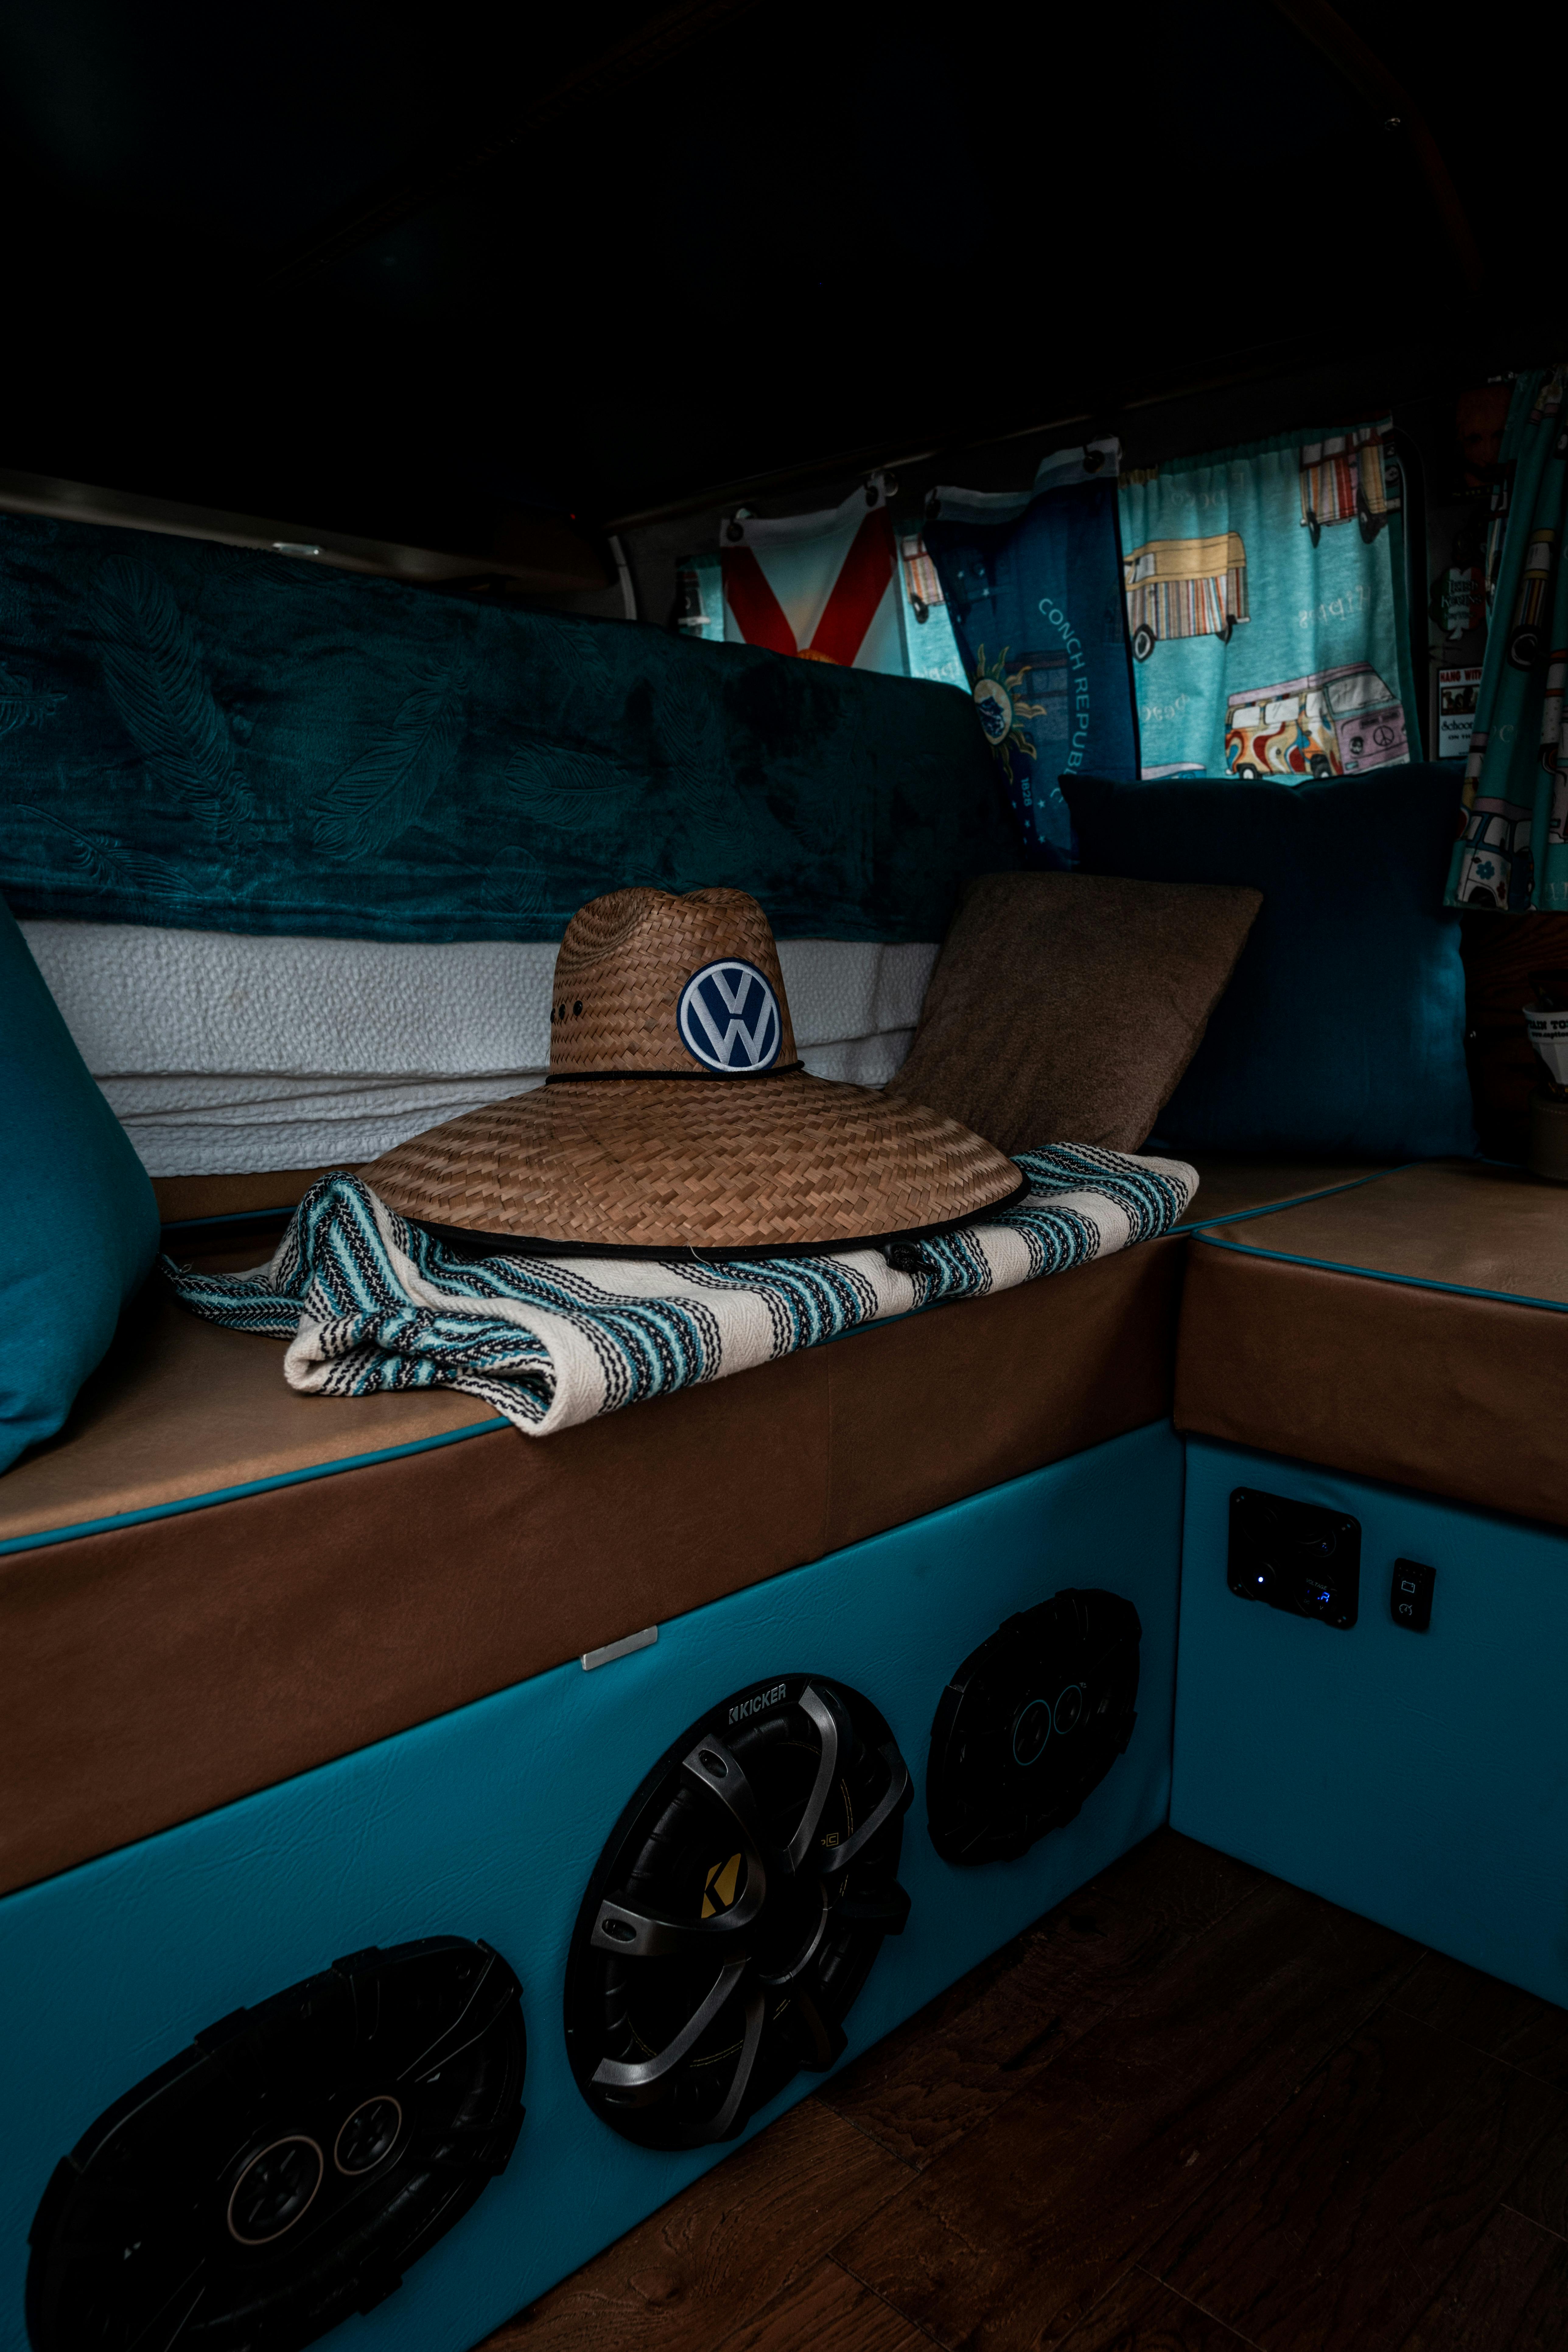 straw hat with the volkswagen logo on the microbus type